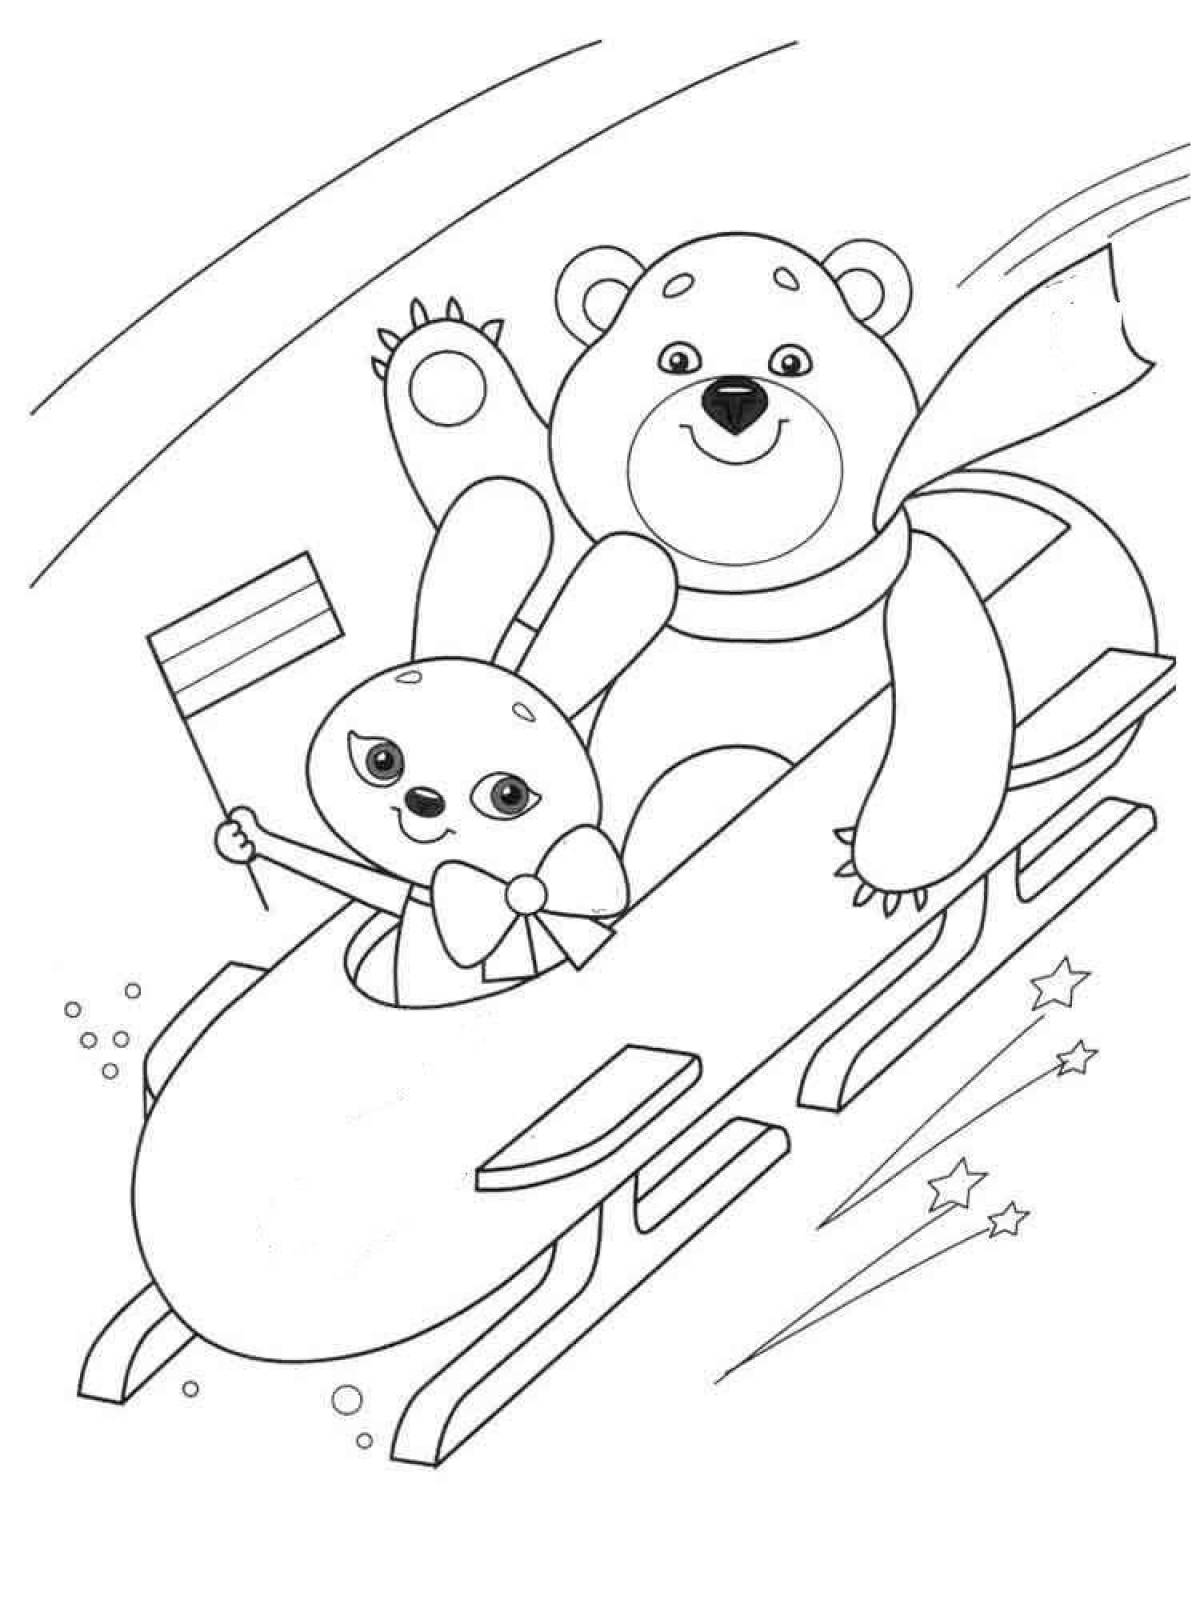 Fascinating winter sports coloring book for kids 6-7 years old